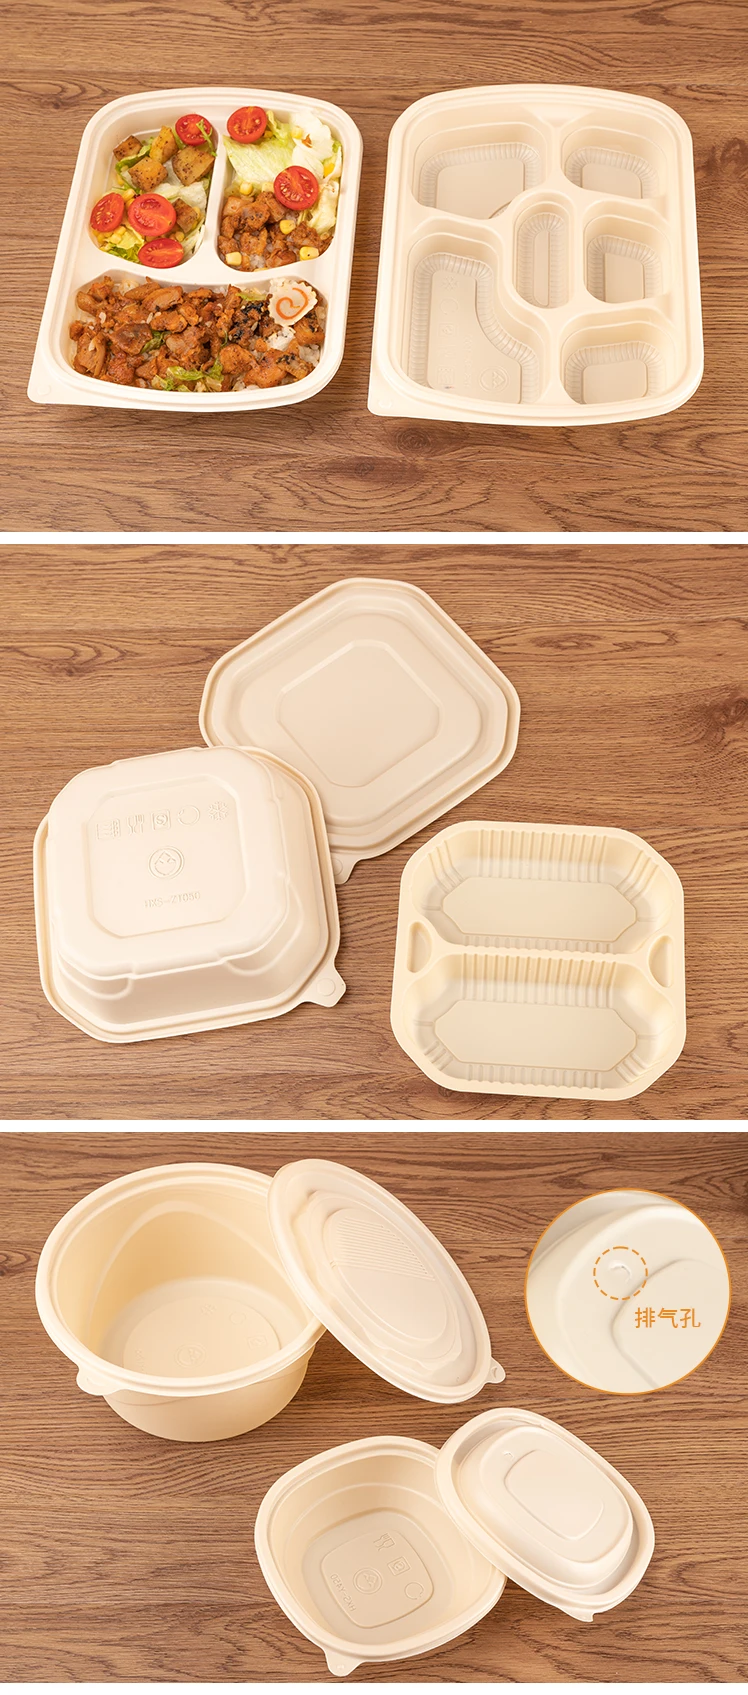 Lokyo Eco Friendly Biodegradable Lunch Corn Starch Tablewares